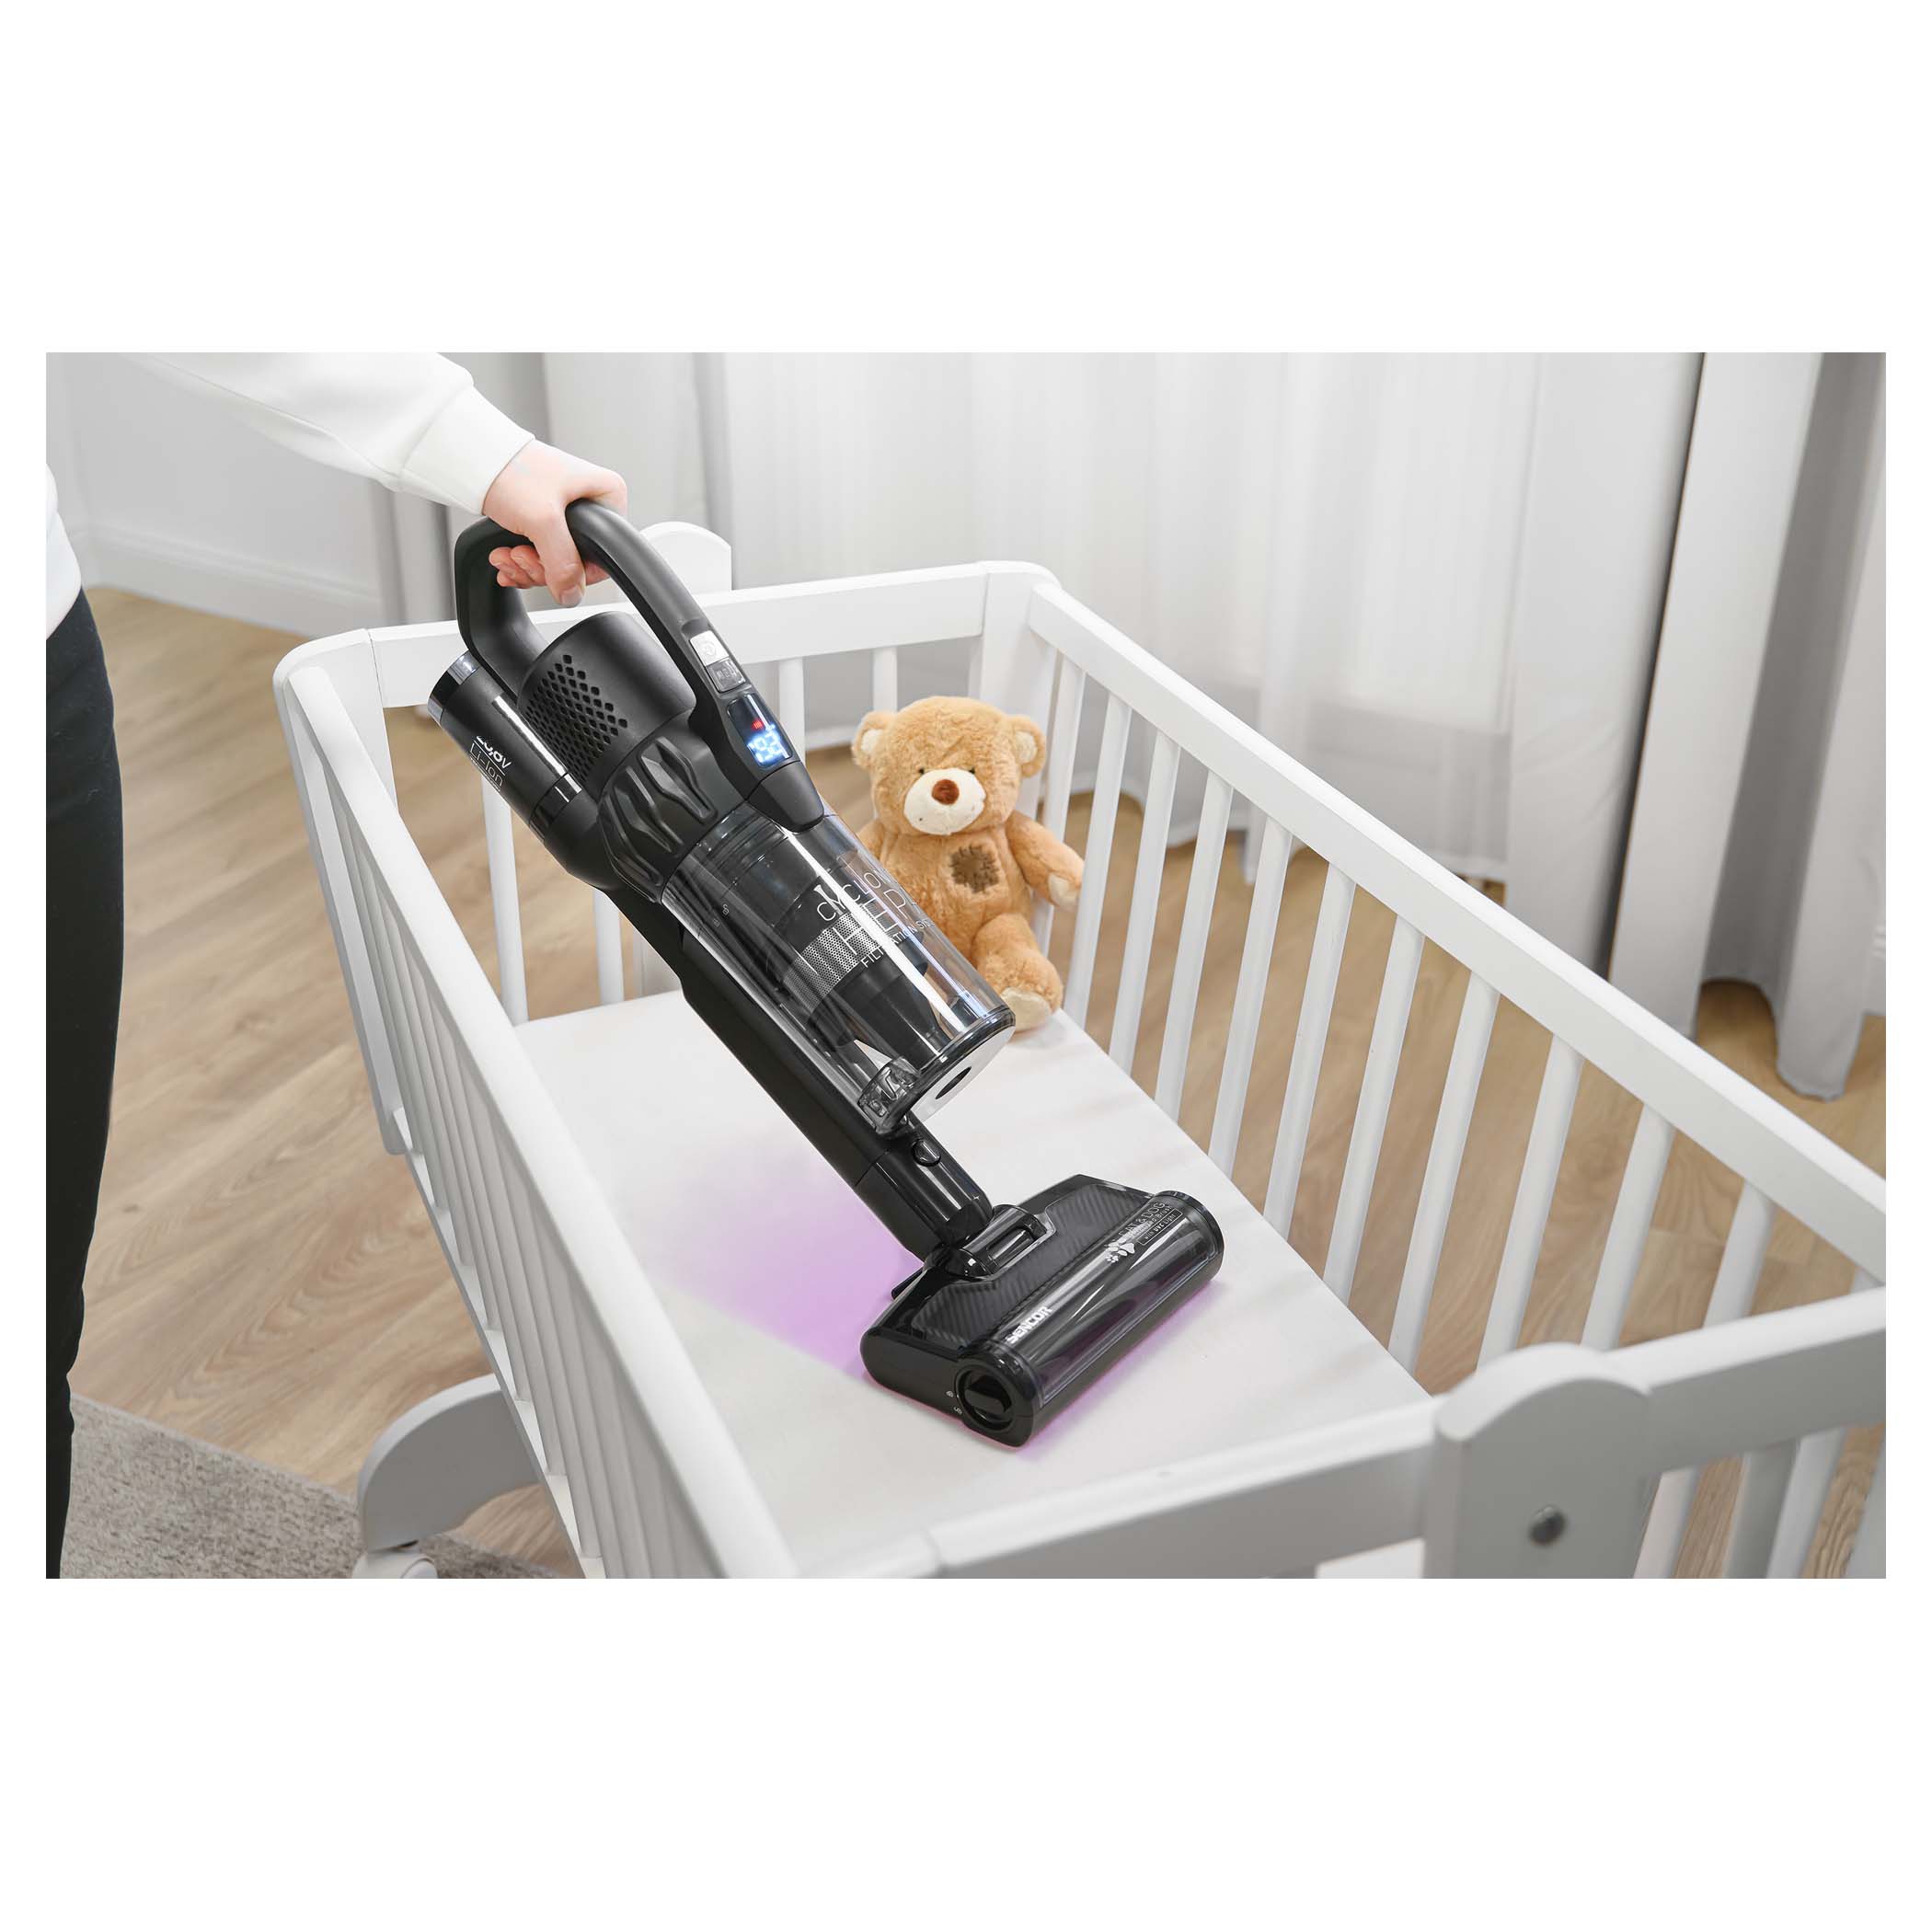 Black + Decker Electric Cleaning Brush Long Handle Lithium Battery